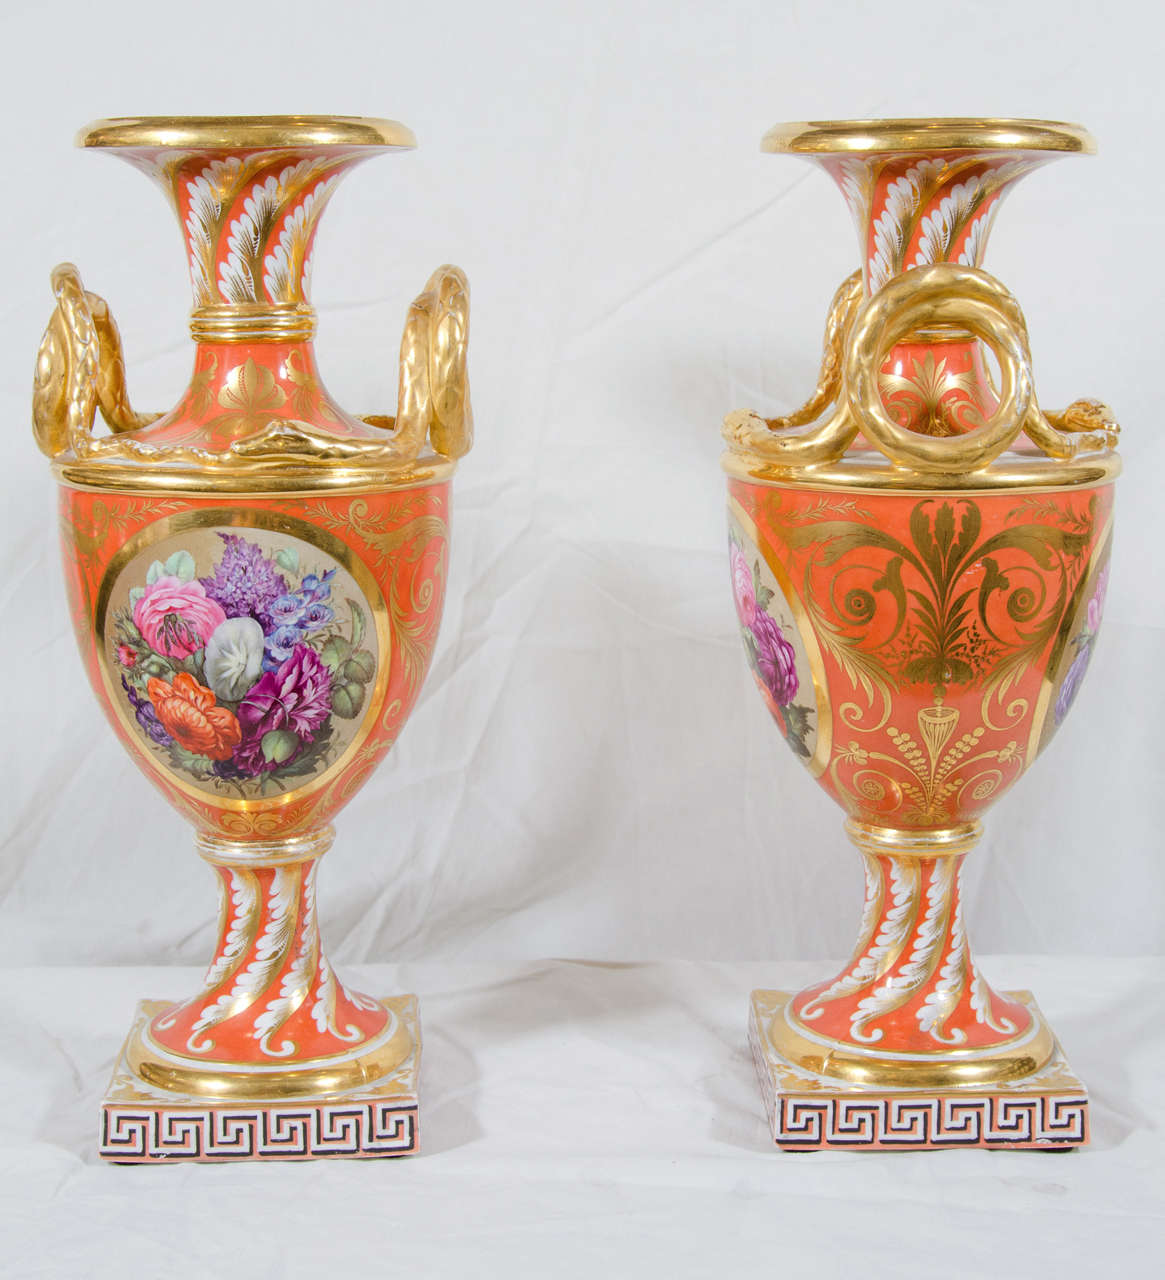 Early 19th Century Antique Porcelain Vases by Derby